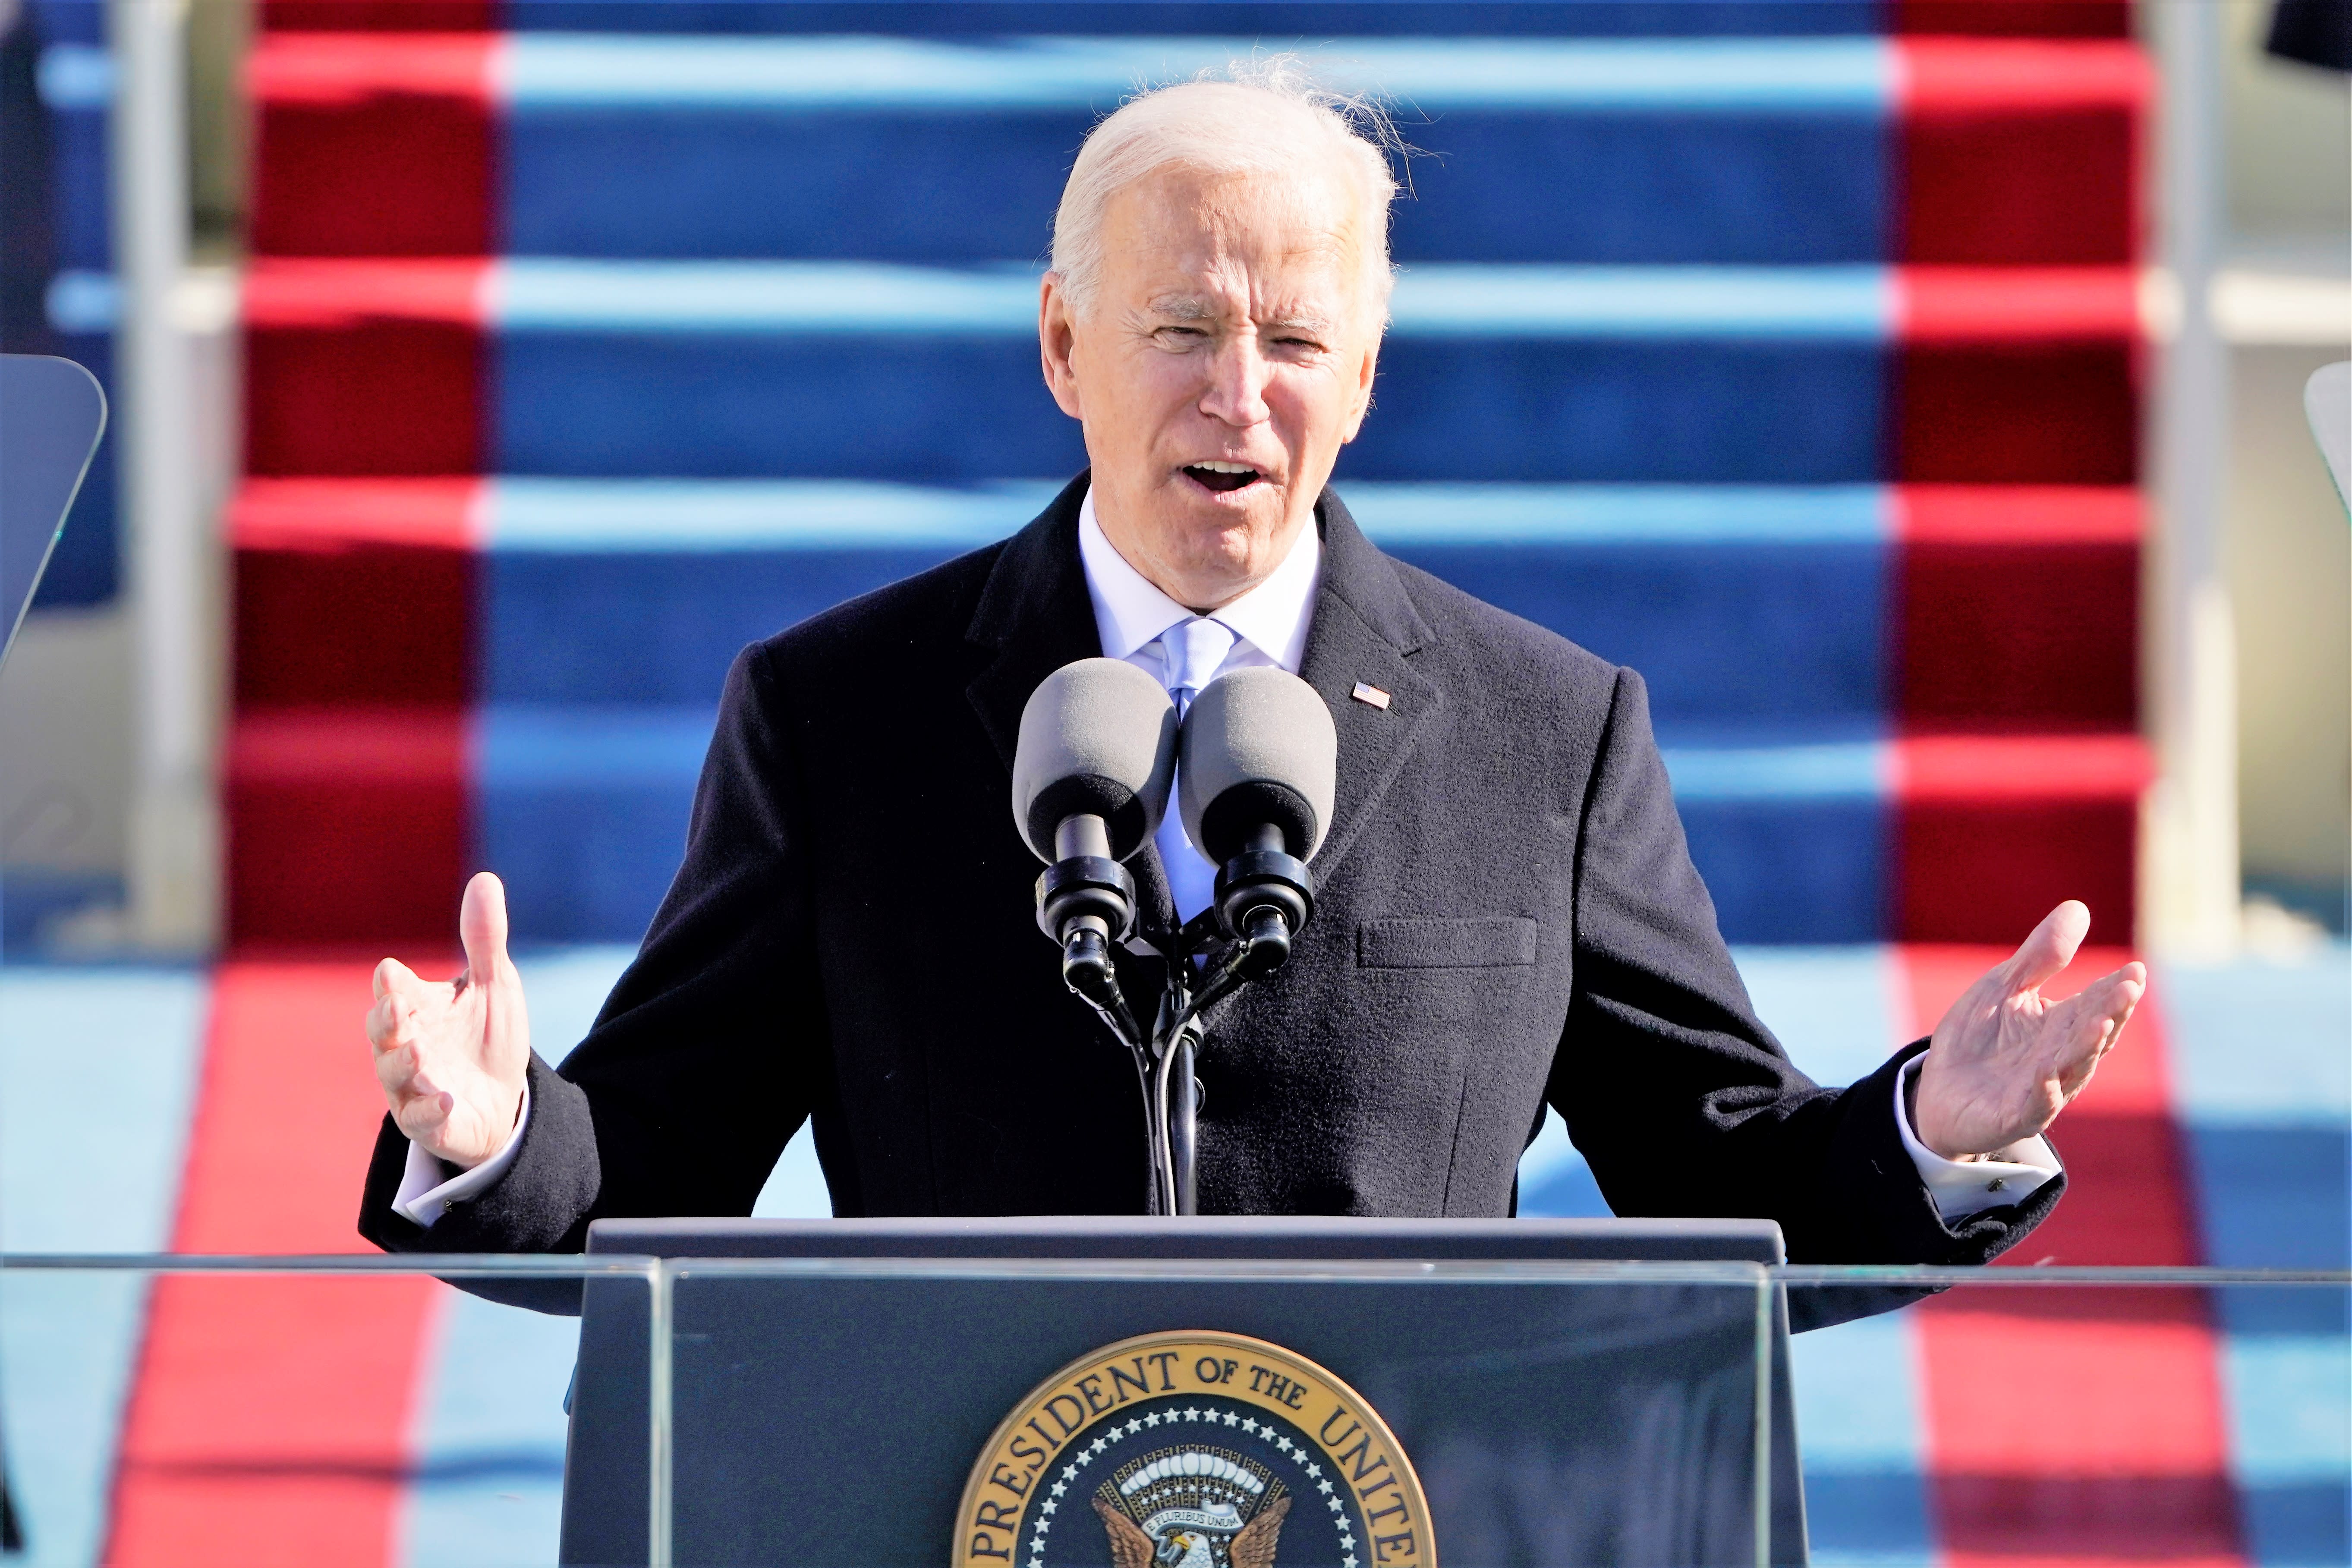 Thursday’s papers: Covid’s concerns and Biden’s wishes